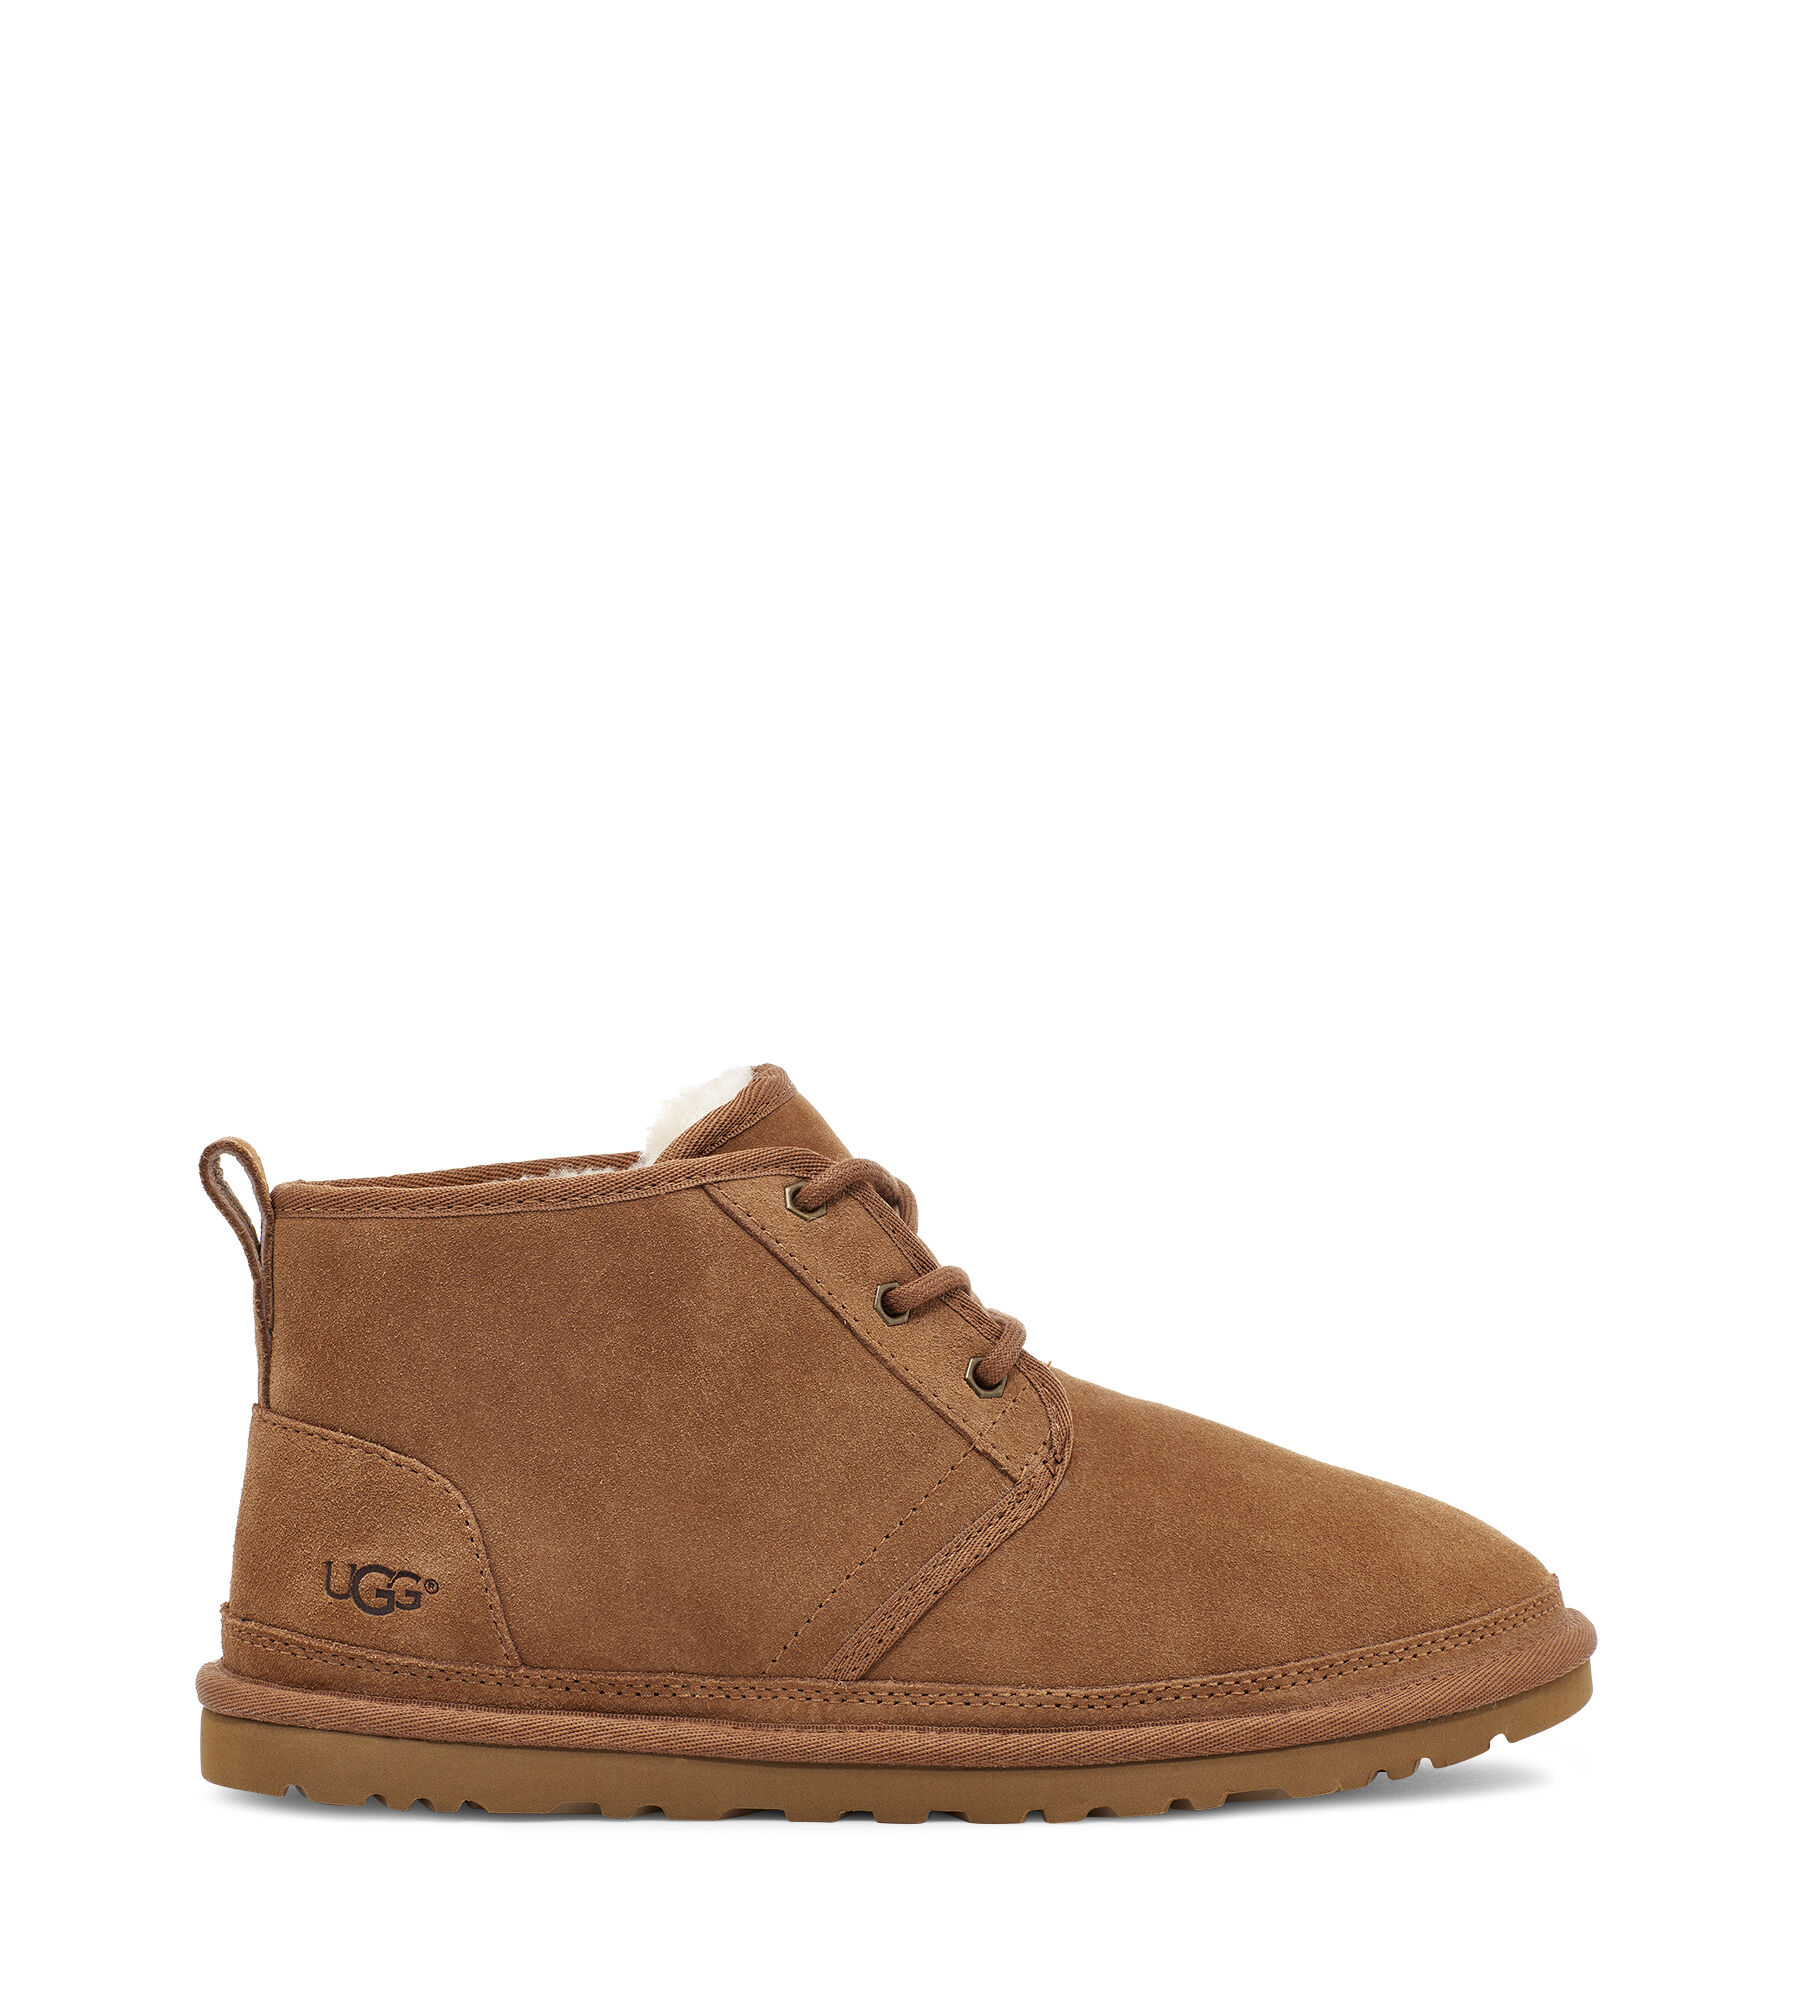 ugg men's lace up boots